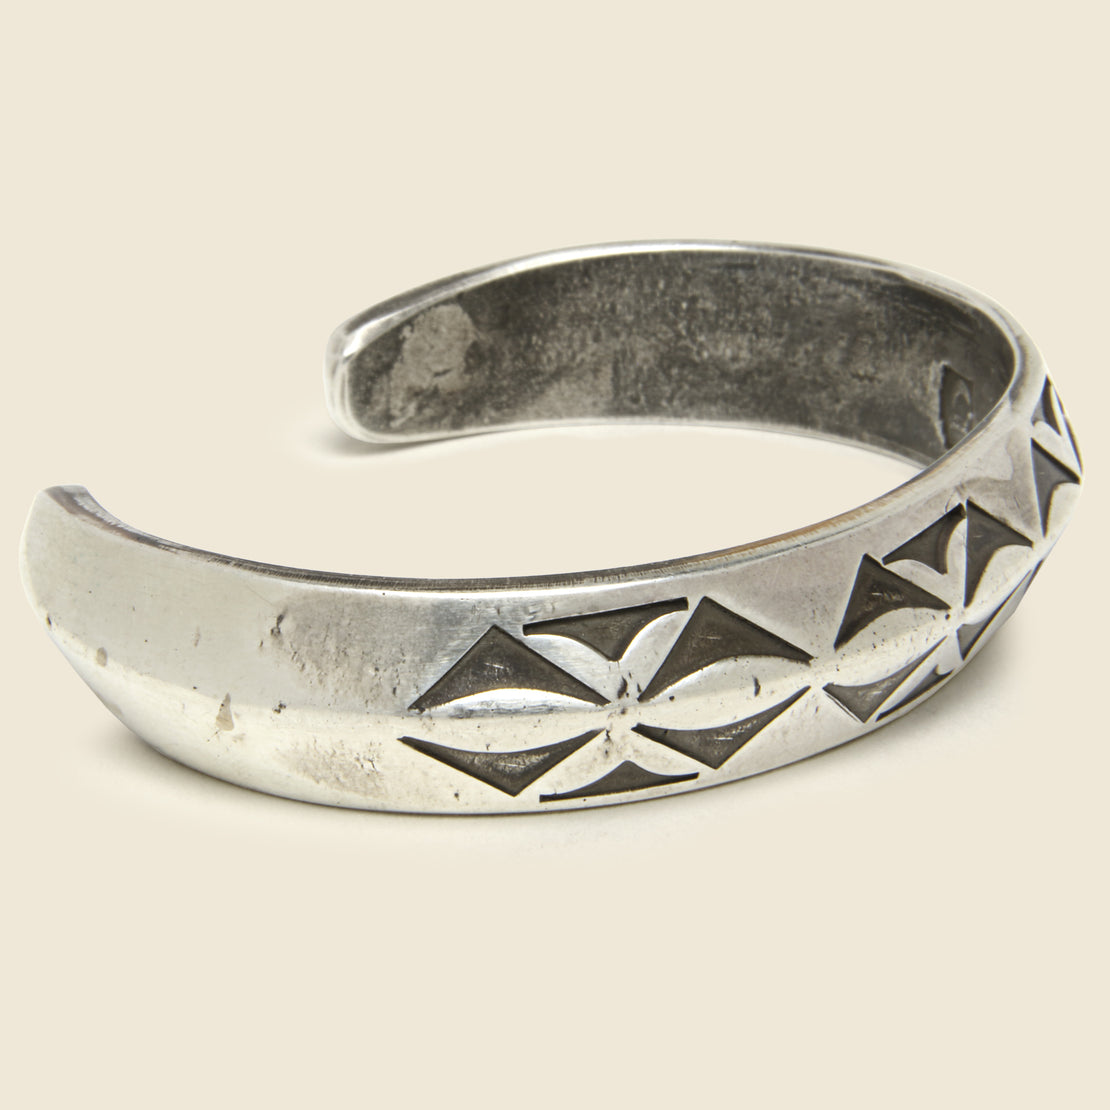 JDS - Women's Triangle Pattern Large Carney Cuff, SS21D, Silver - Jonathan Day Silversmith - STAG Provisions - W - One & Done - Accessories & Jewelry